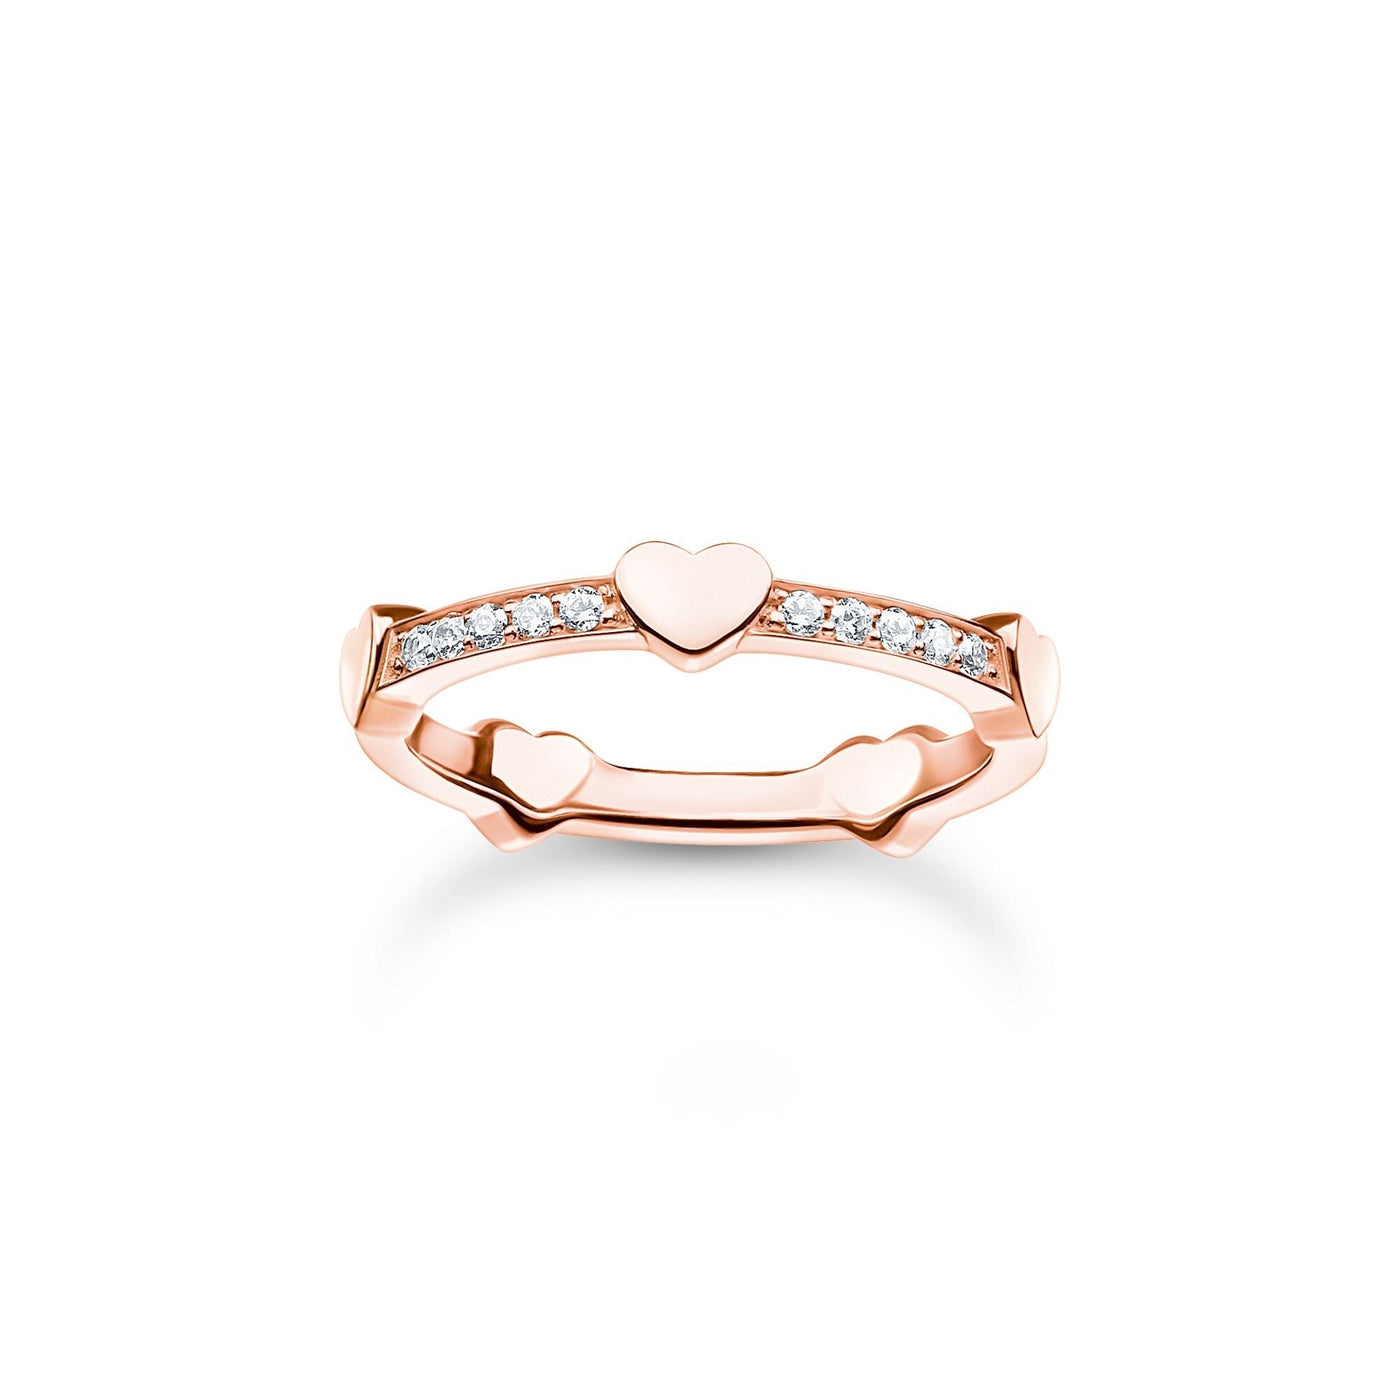 Thomas Sabo Ring pave with hearts rose gold